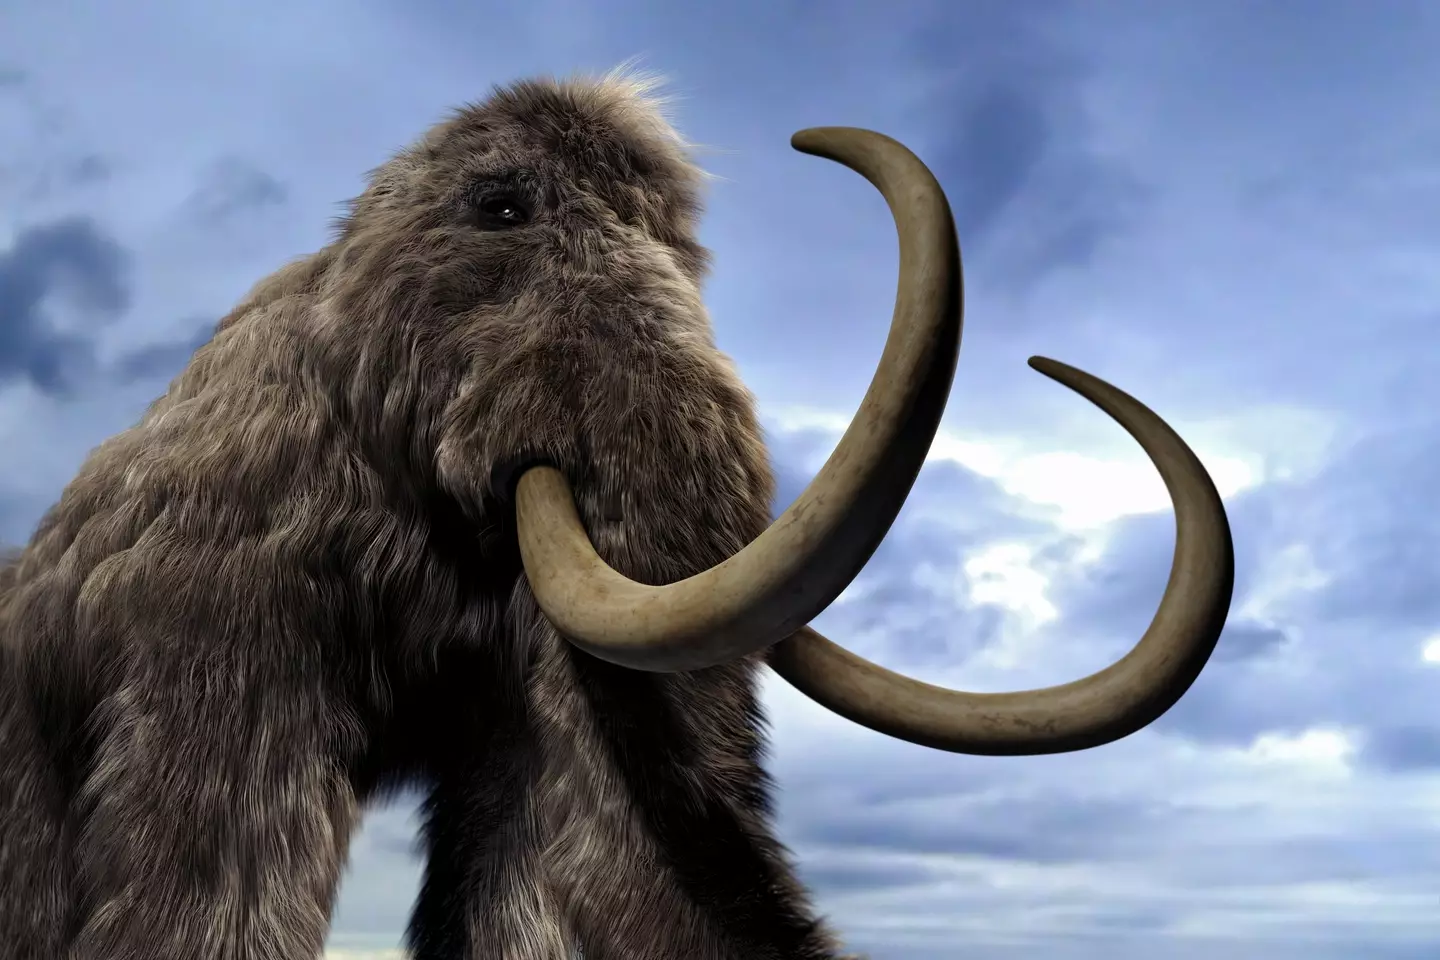 The woolly mammoth, it's like a fluffy elephant. Or would be if they weren't all dead.